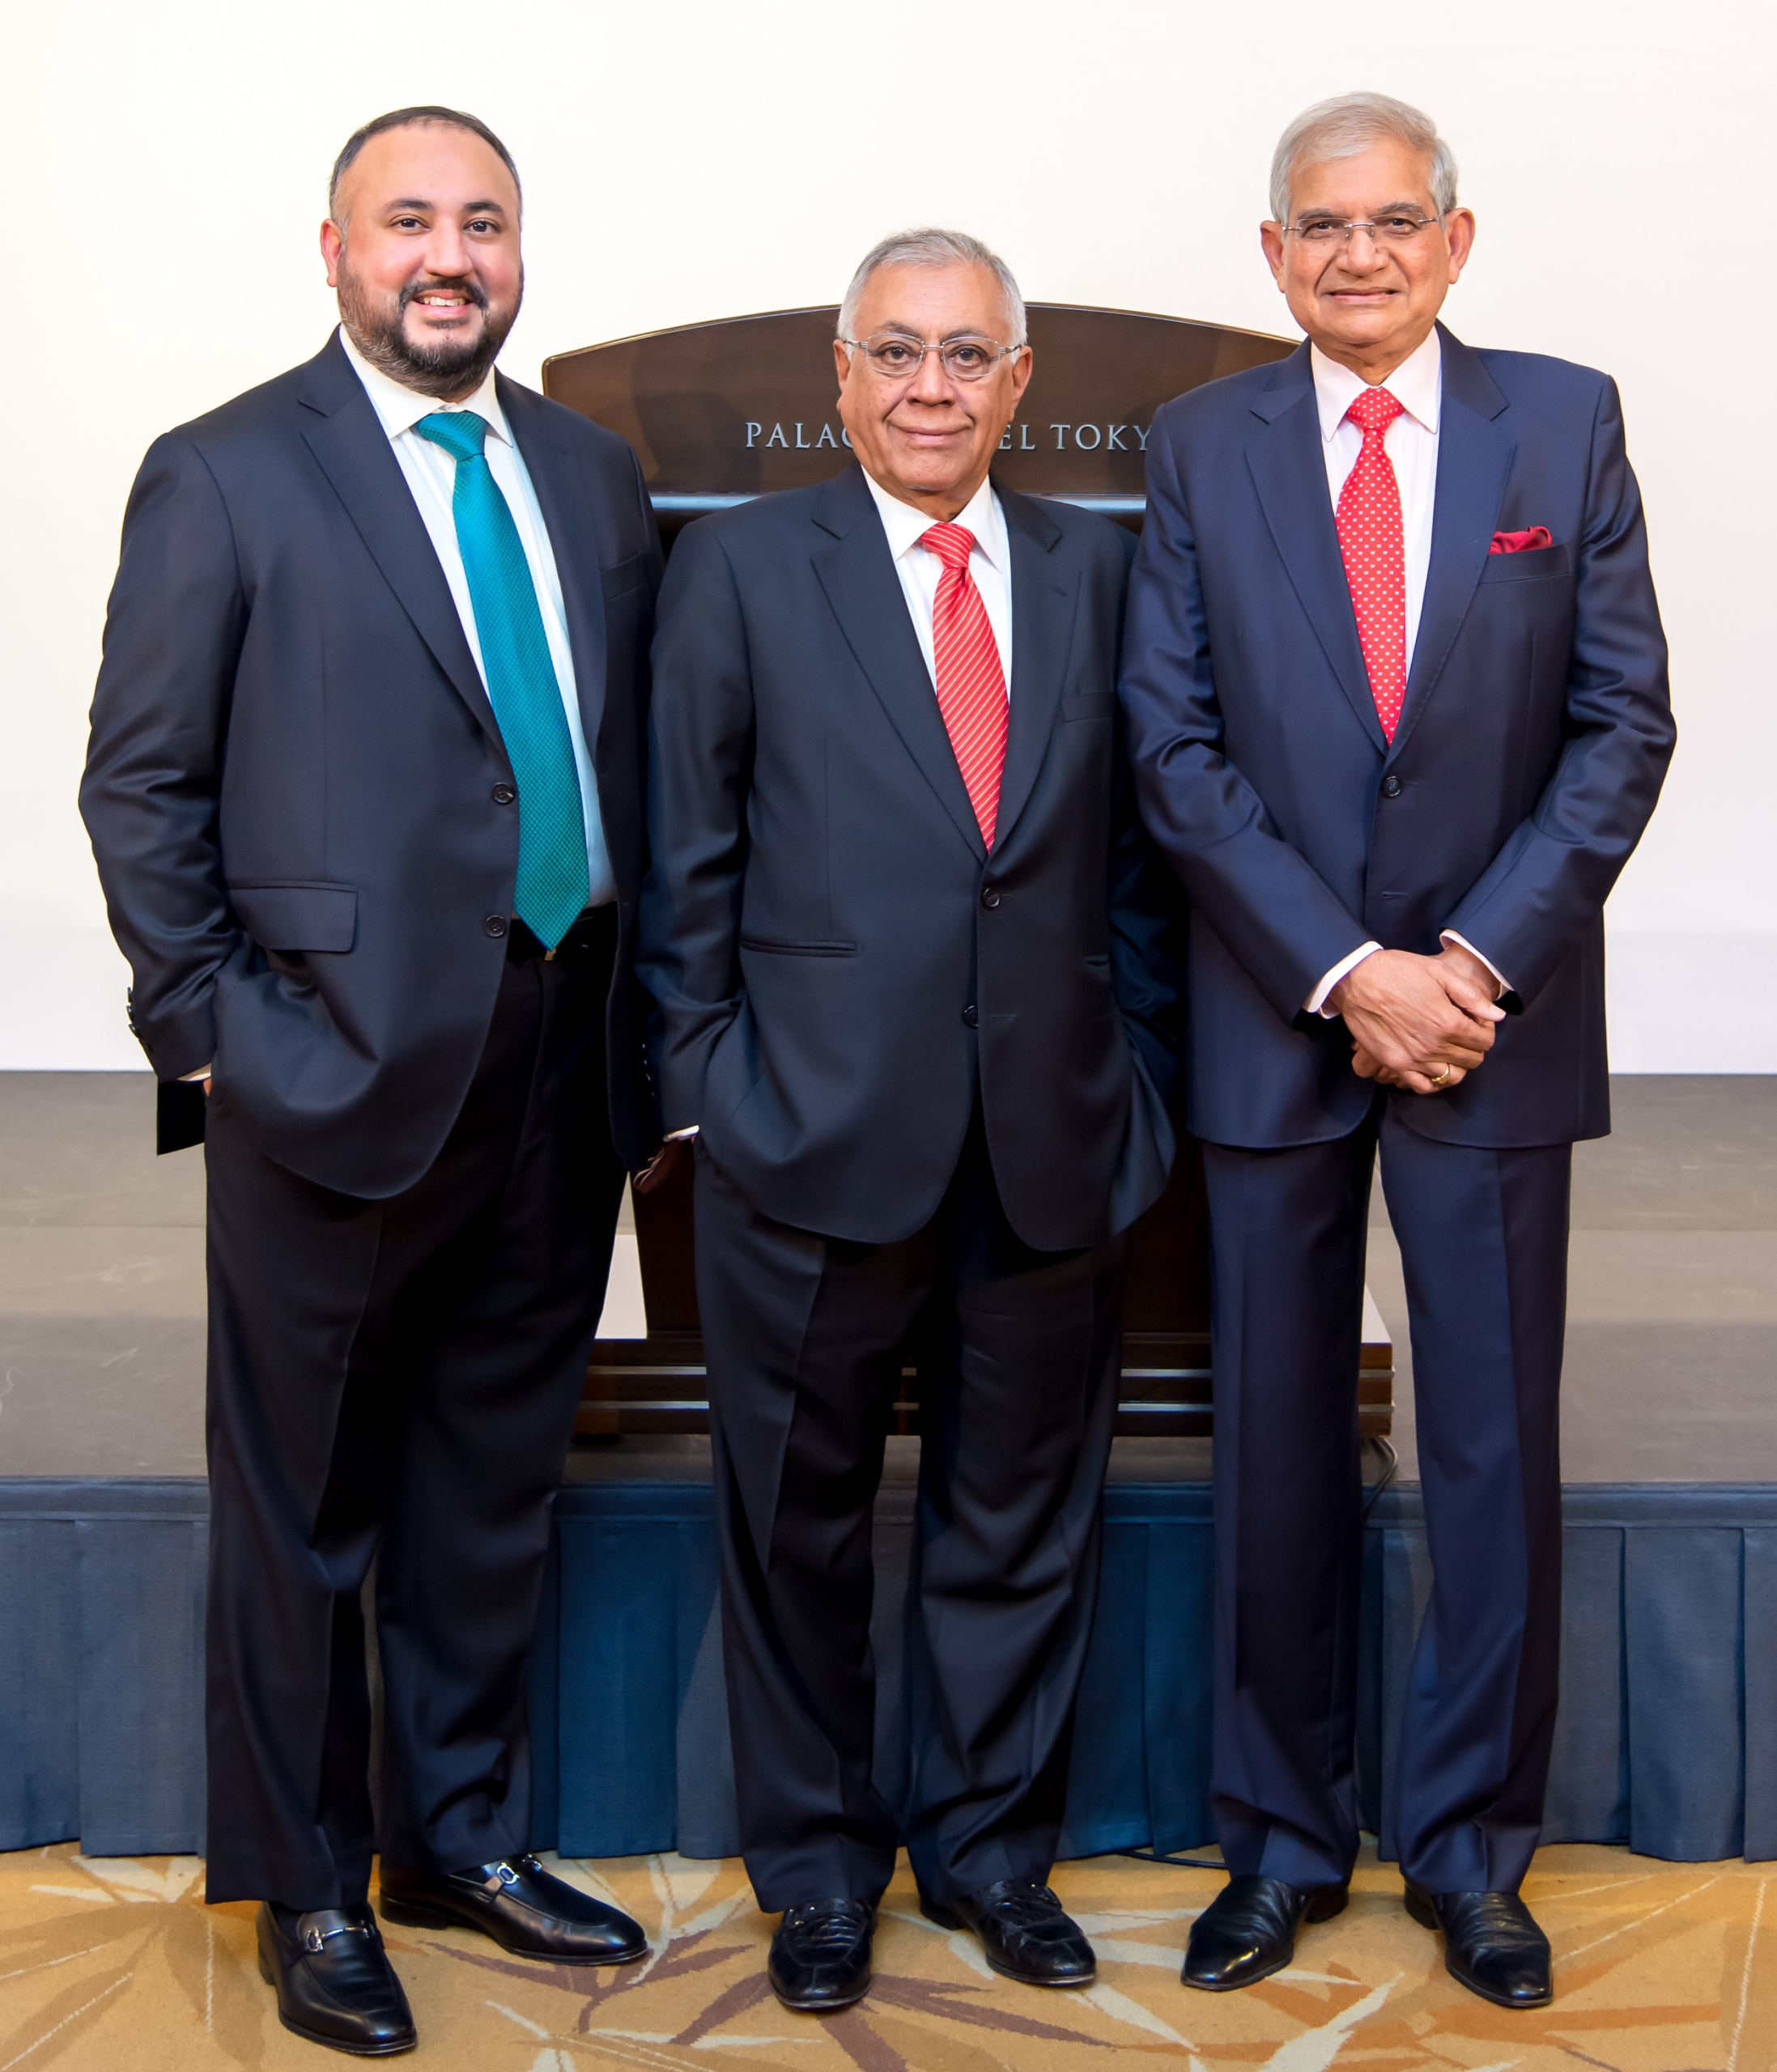 Fleet Management Limited announces strategic leadership transition in its 30th year